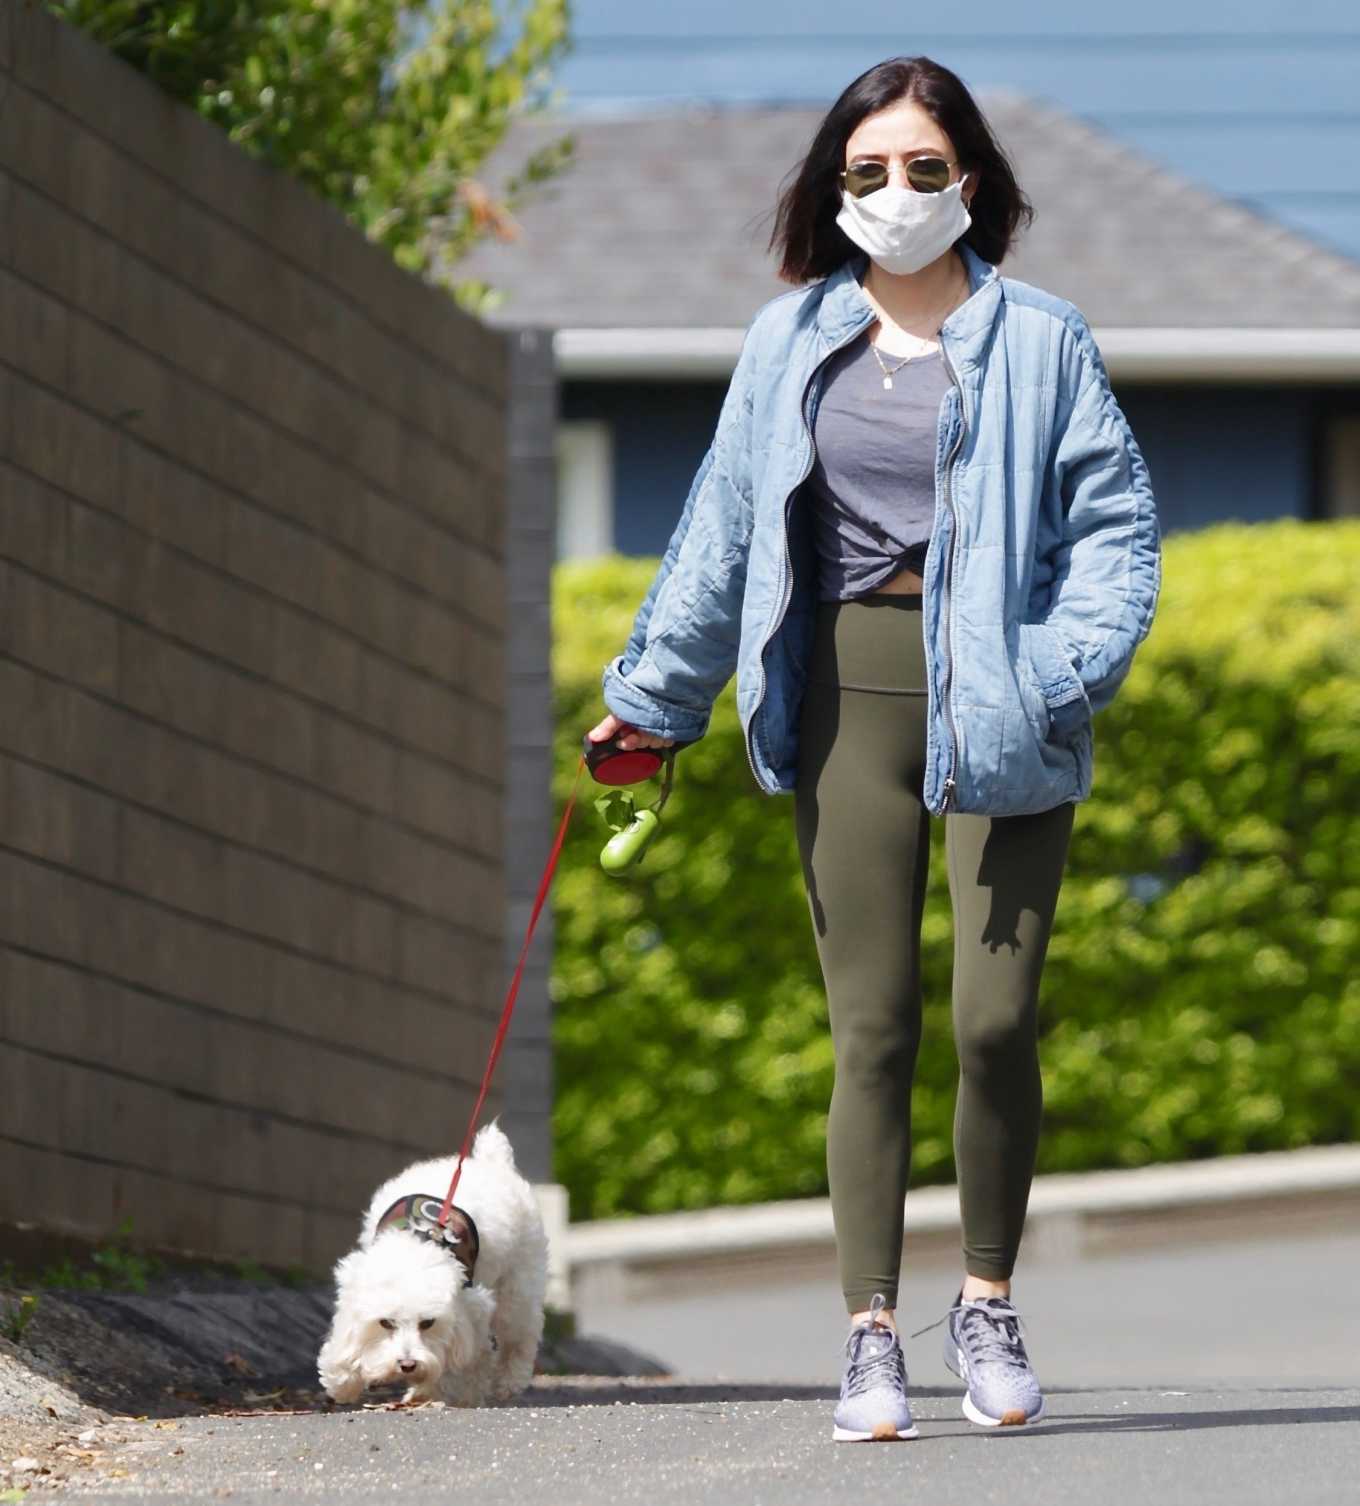 Lucy Hales â€“ Wears a protective mask while walk with Elvis